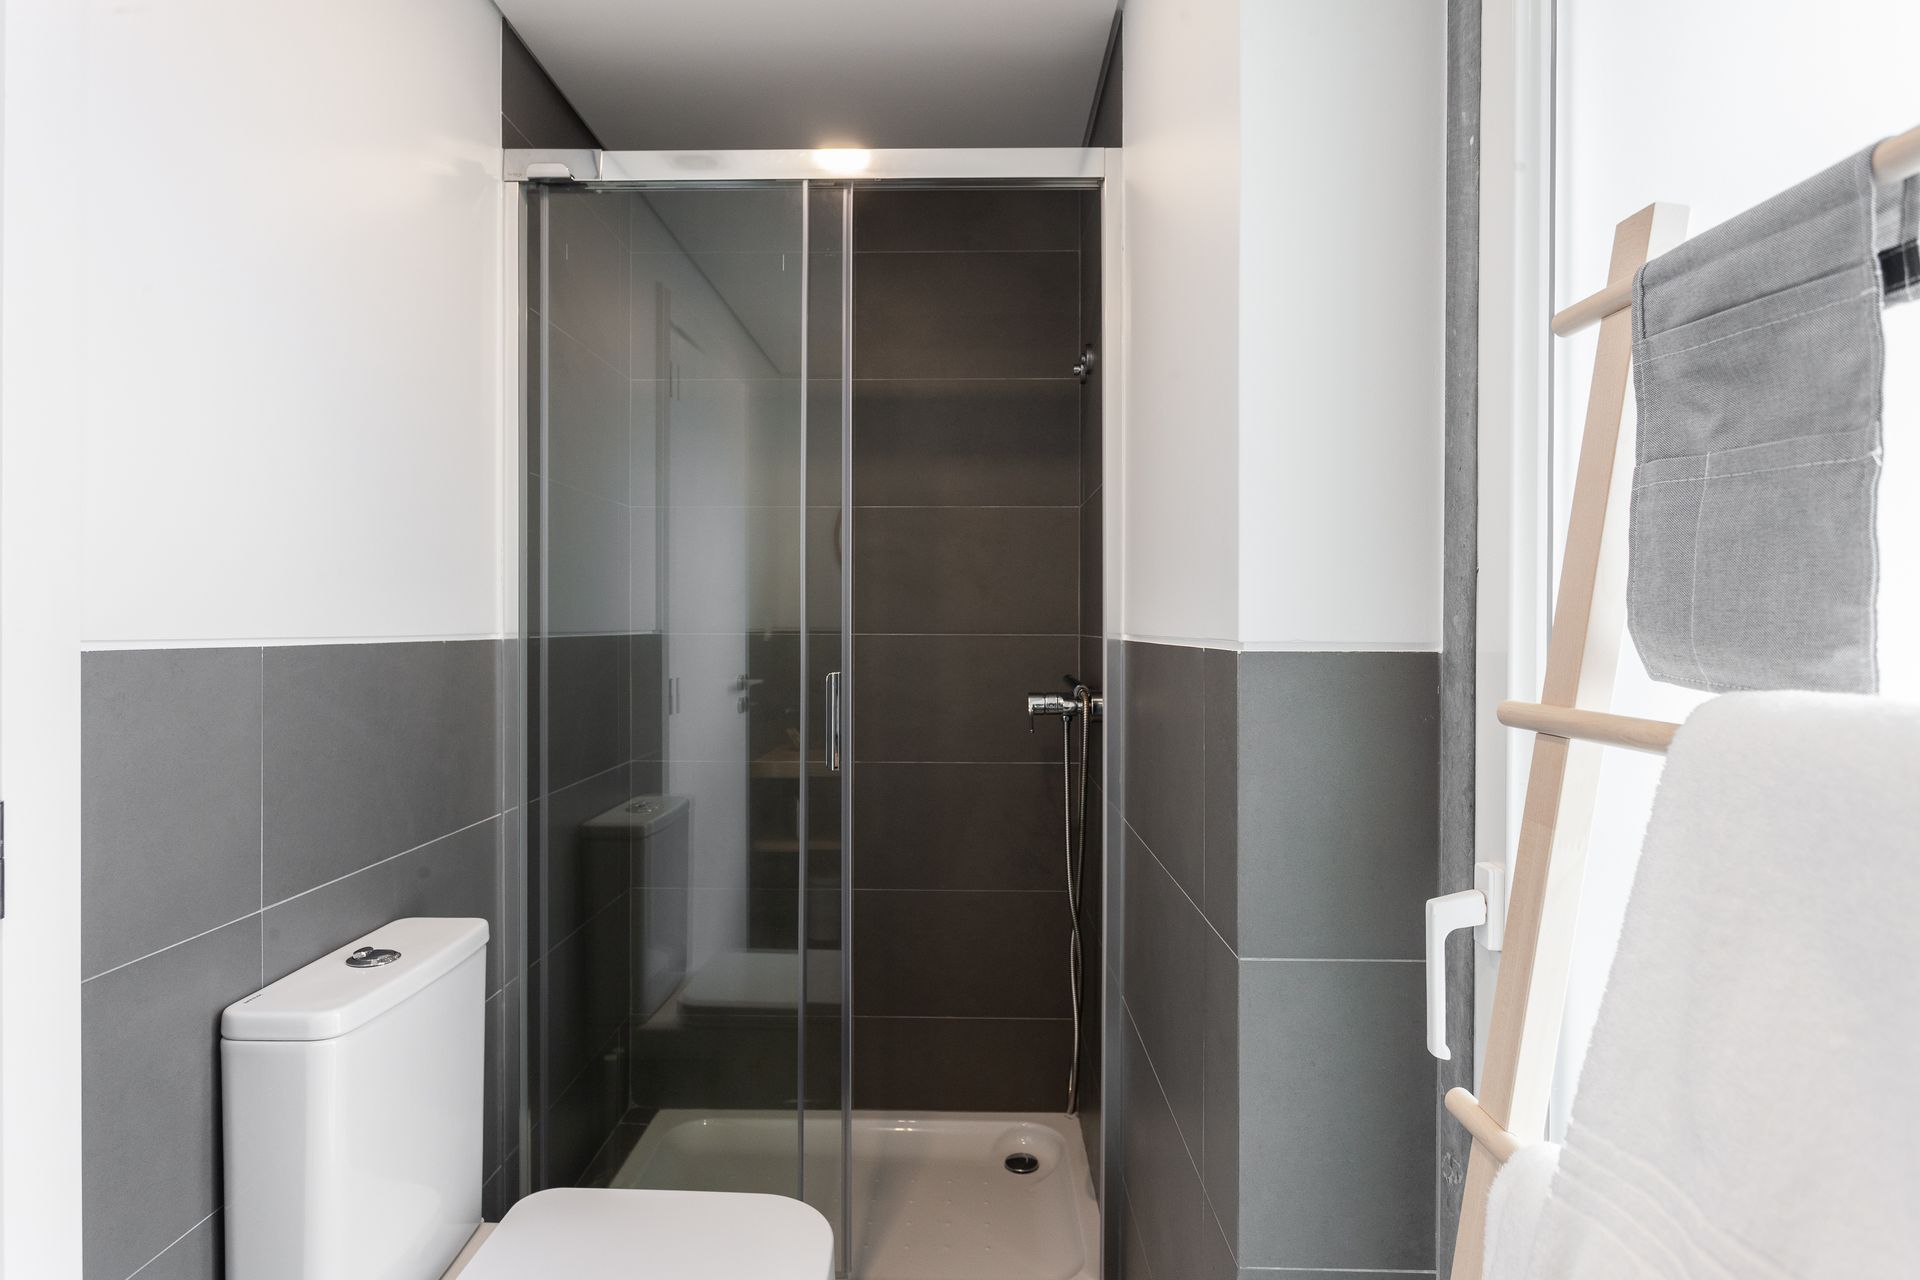 a bathroom with a toilet , shower and towel rack .